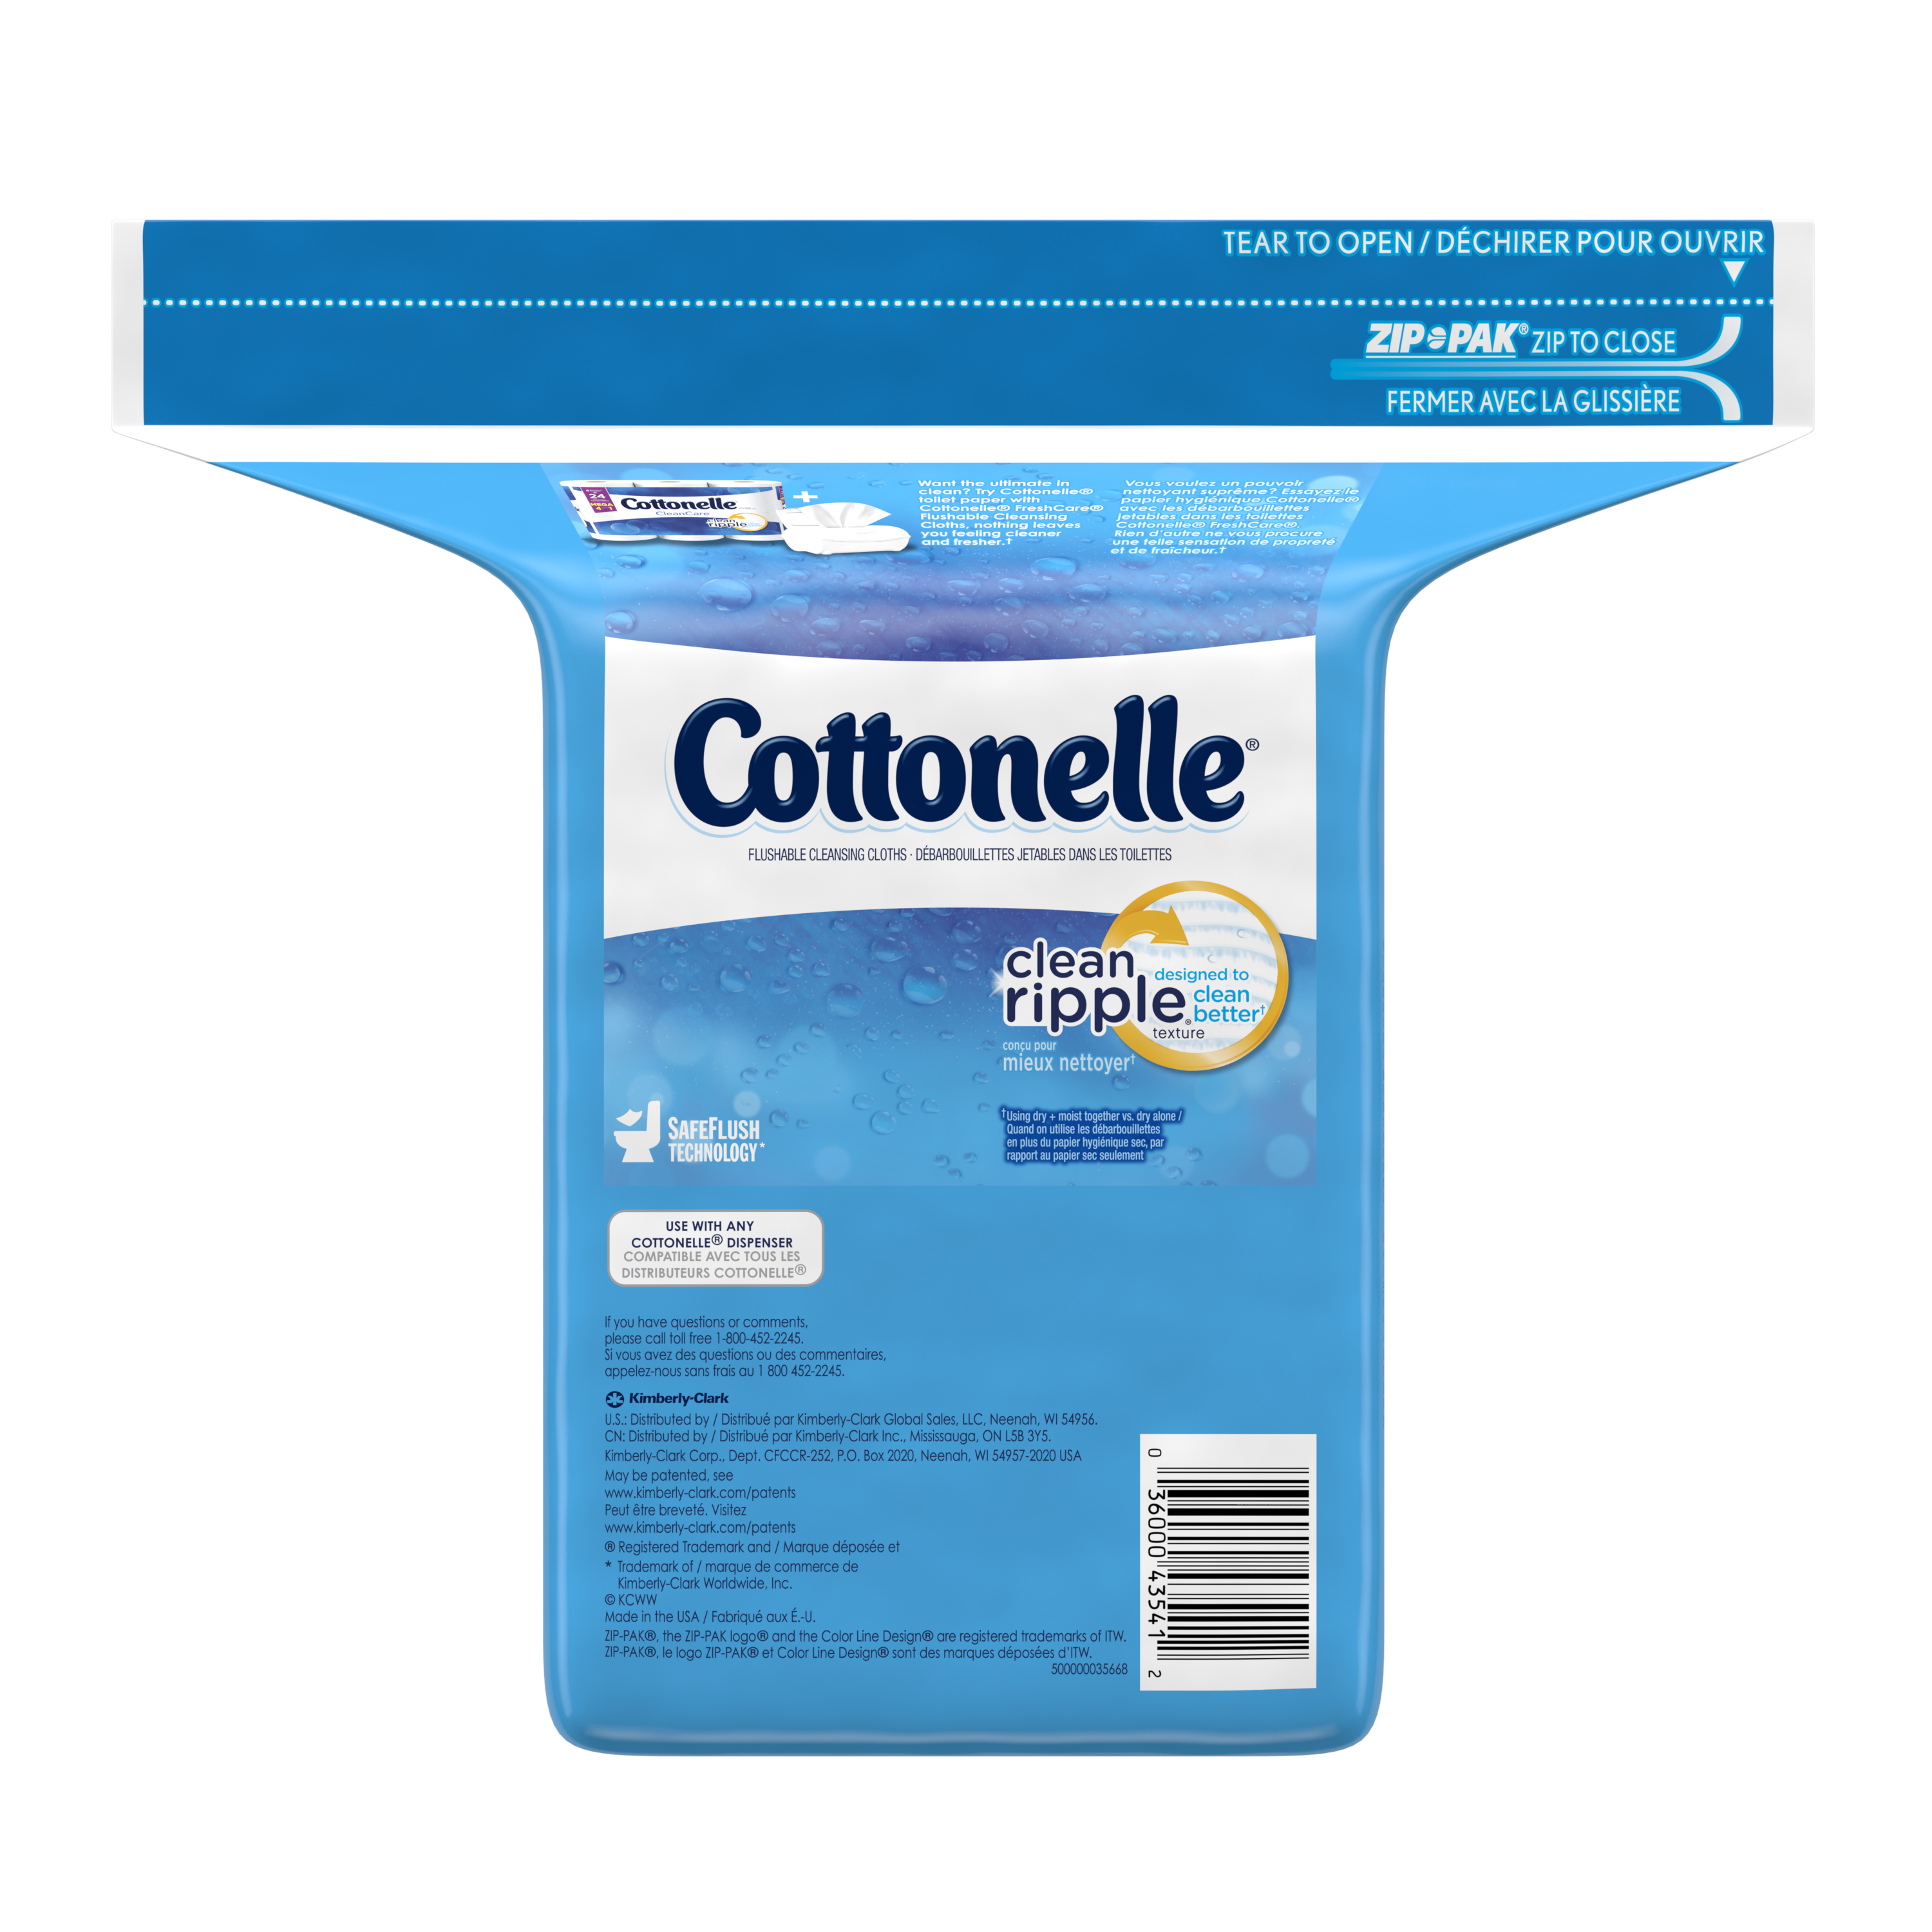 Cottonelle Flushable Wet Wipes for Adults, 1 Refill Pack, 252 Flushable Wipes, Alcohol-Free - image 4 of 10